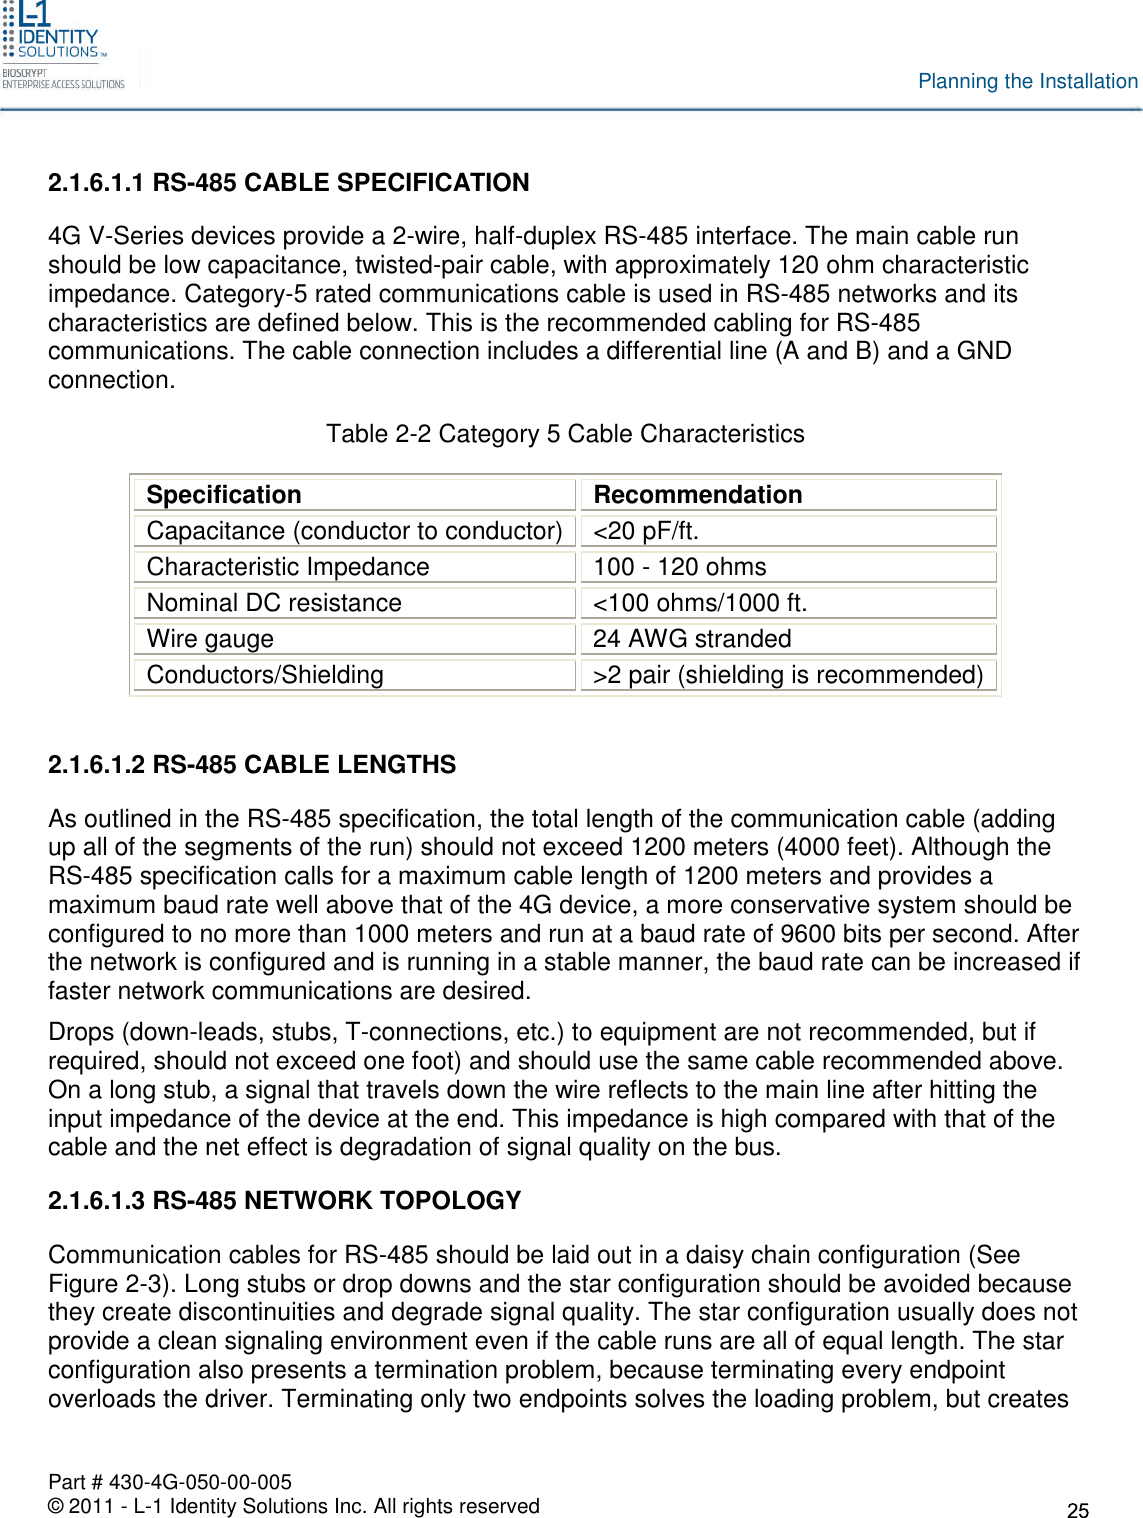 Part # 430-4G-050-00-005© 2011 - L-1 Identity Solutions Inc. All rights reservedPlanning the Installation2.1.6.1.1 RS-485 CABLE SPECIFICATION4G V-Series devices provide a 2-wire, half-duplex RS-485 interface. The main cable runshould be low capacitance, twisted-pair cable, with approximately 120 ohm characteristicimpedance. Category-5 rated communications cable is used in RS-485 networks and itscharacteristics are defined below. This is the recommended cabling for RS-485communications. The cable connection includes a differential line (A and B) and a GNDconnection.Table 2-2 Category 5 Cable CharacteristicsSpecificationRecommendationCapacitance (conductor to conductor) &lt;20 pF/ft.Characteristic Impedance 100 - 120 ohmsNominal DC resistance &lt;100 ohms/1000 ft.Wire gauge 24 AWG strandedConductors/Shielding &gt;2 pair (shielding is recommended)2.1.6.1.2 RS-485 CABLE LENGTHSAs outlined in the RS-485 specification, the total length of the communication cable (addingup all of the segments of the run) should not exceed 1200 meters (4000 feet). Although theRS-485 specification calls for a maximum cable length of 1200 meters and provides amaximum baud rate well above that of the 4G device, a more conservative system should beconfigured to no more than 1000 meters and run at a baud rate of 9600 bits per second. Afterthe network is configured and is running in a stable manner, the baud rate can be increased iffaster network communications are desired.Drops (down-leads, stubs, T-connections, etc.) to equipment are not recommended, but ifrequired, should not exceed one foot) and should use the same cable recommended above.On a long stub, a signal that travels down the wire reflects to the main line after hitting theinput impedance of the device at the end. This impedance is high compared with that of thecable and the net effect is degradation of signal quality on the bus.2.1.6.1.3 RS-485 NETWORK TOPOLOGYCommunication cables for RS-485 should be laid out in a daisy chain configuration (SeeFigure 2-3). Long stubs or drop downs and the star configuration should be avoided becausethey create discontinuities and degrade signal quality. The star configuration usually does notprovide a clean signaling environment even if the cable runs are all of equal length. The starconfiguration also presents a termination problem, because terminating every endpointoverloads the driver. Terminating only two endpoints solves the loading problem, but creates